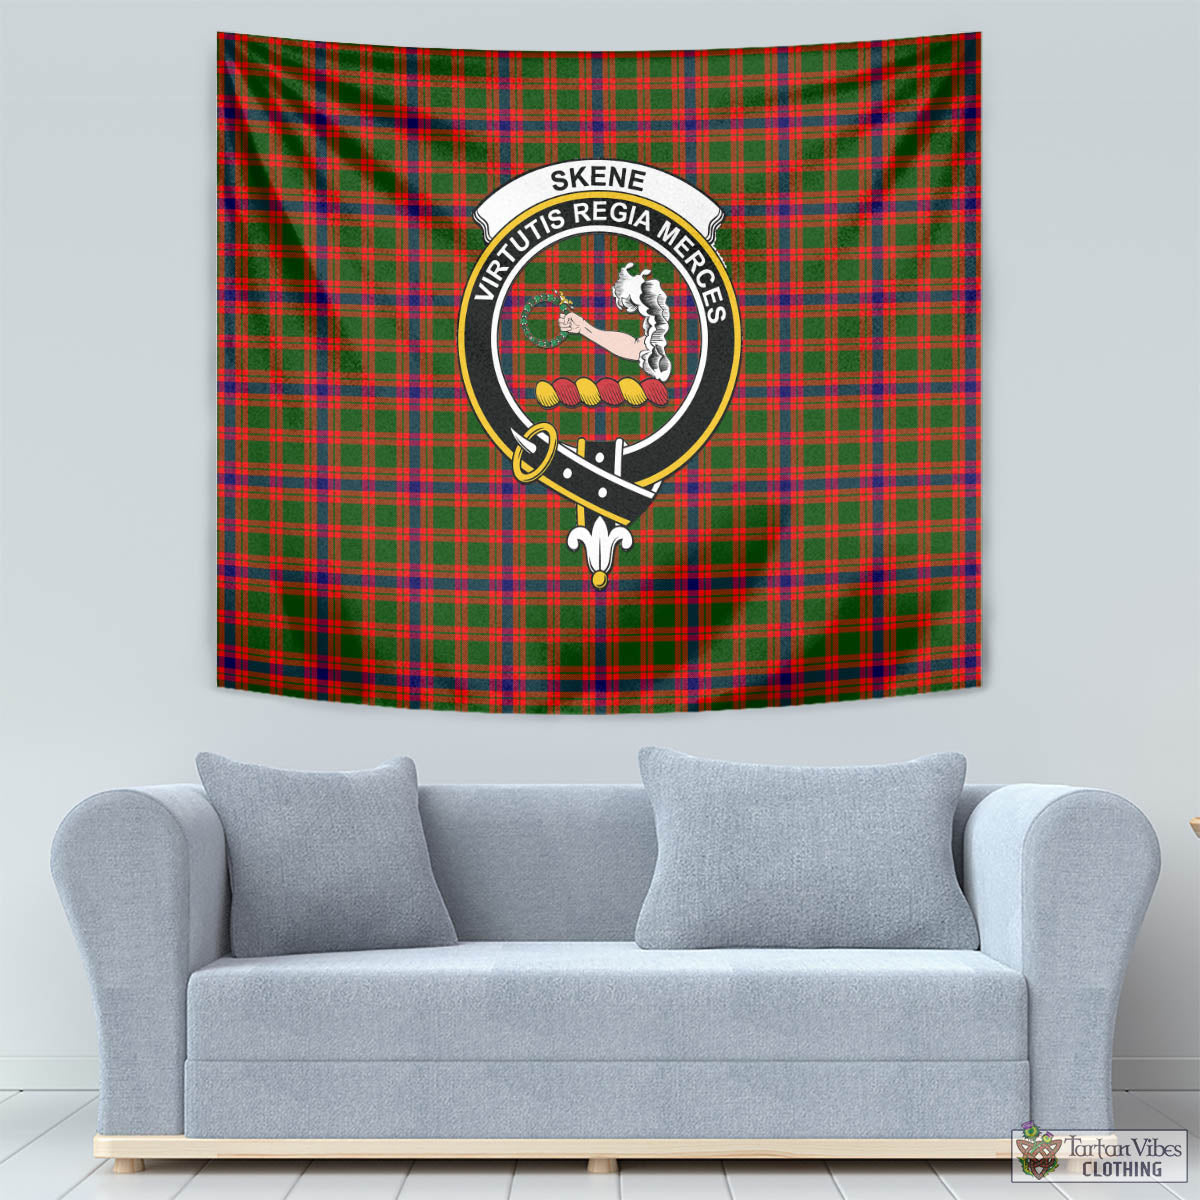 Tartan Vibes Clothing Skene Modern Tartan Tapestry Wall Hanging and Home Decor for Room with Family Crest